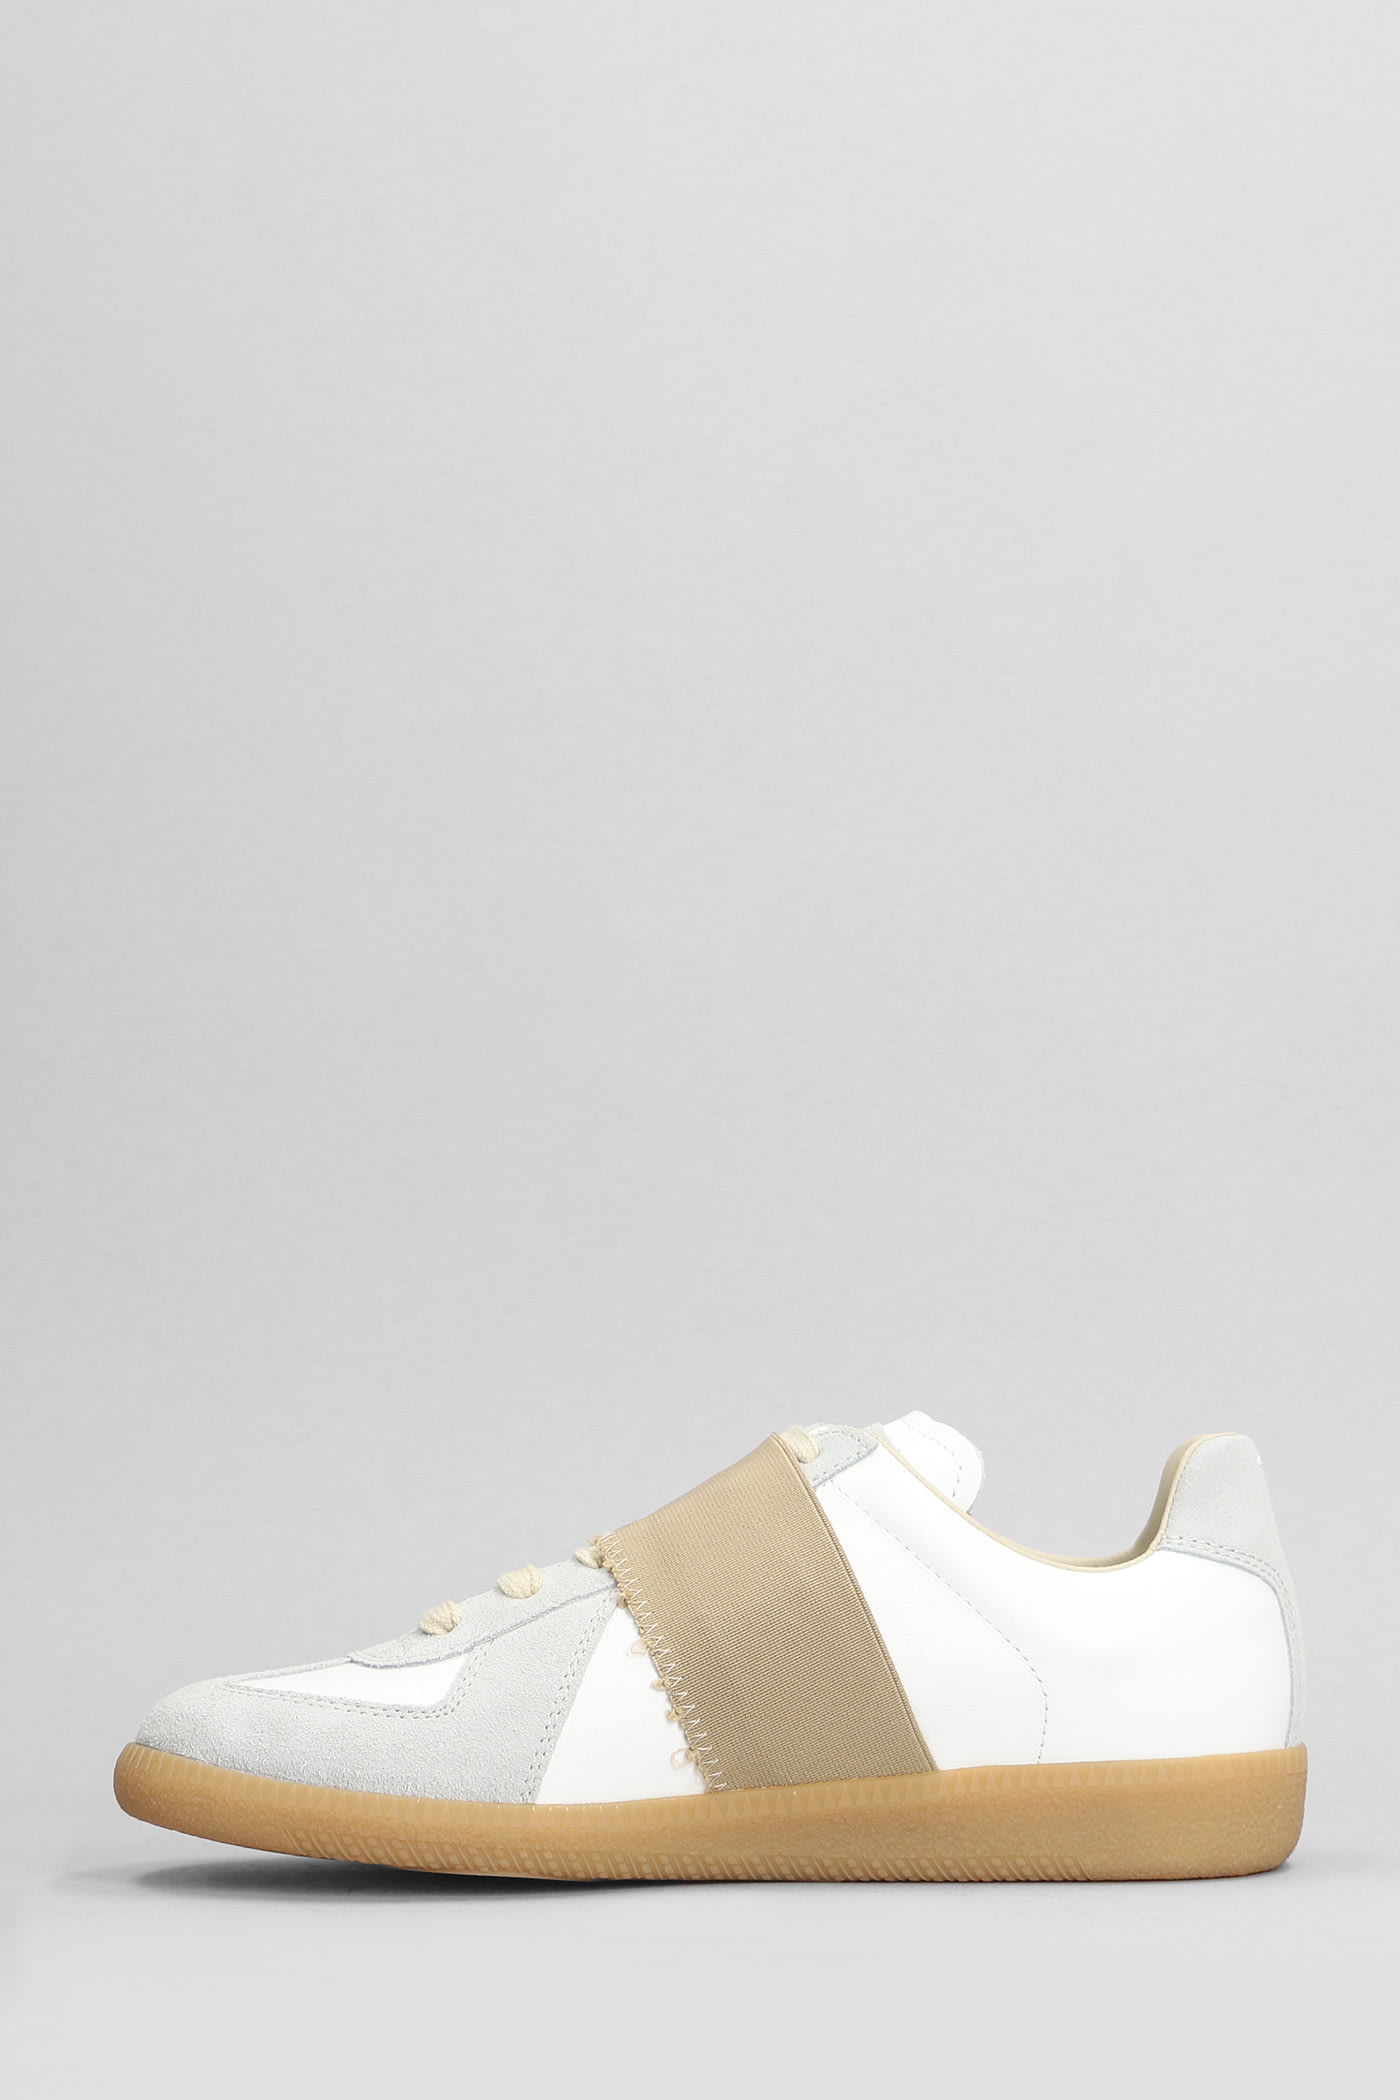 Shop Maison Margiela Replica Sneakers In White Suede And Leather